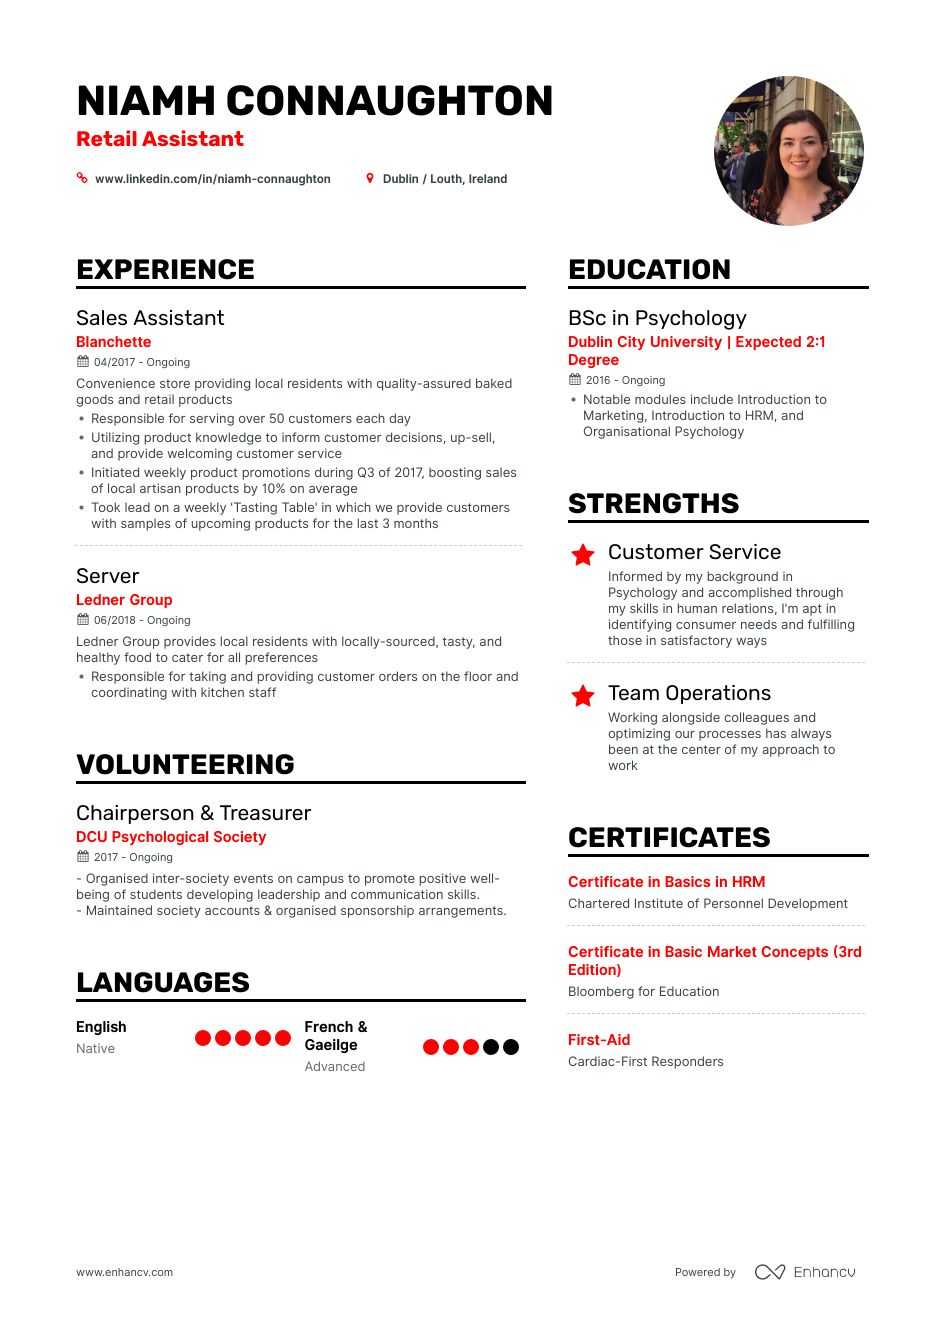 Retail Resume Examples and Skills You Need to Get Hired